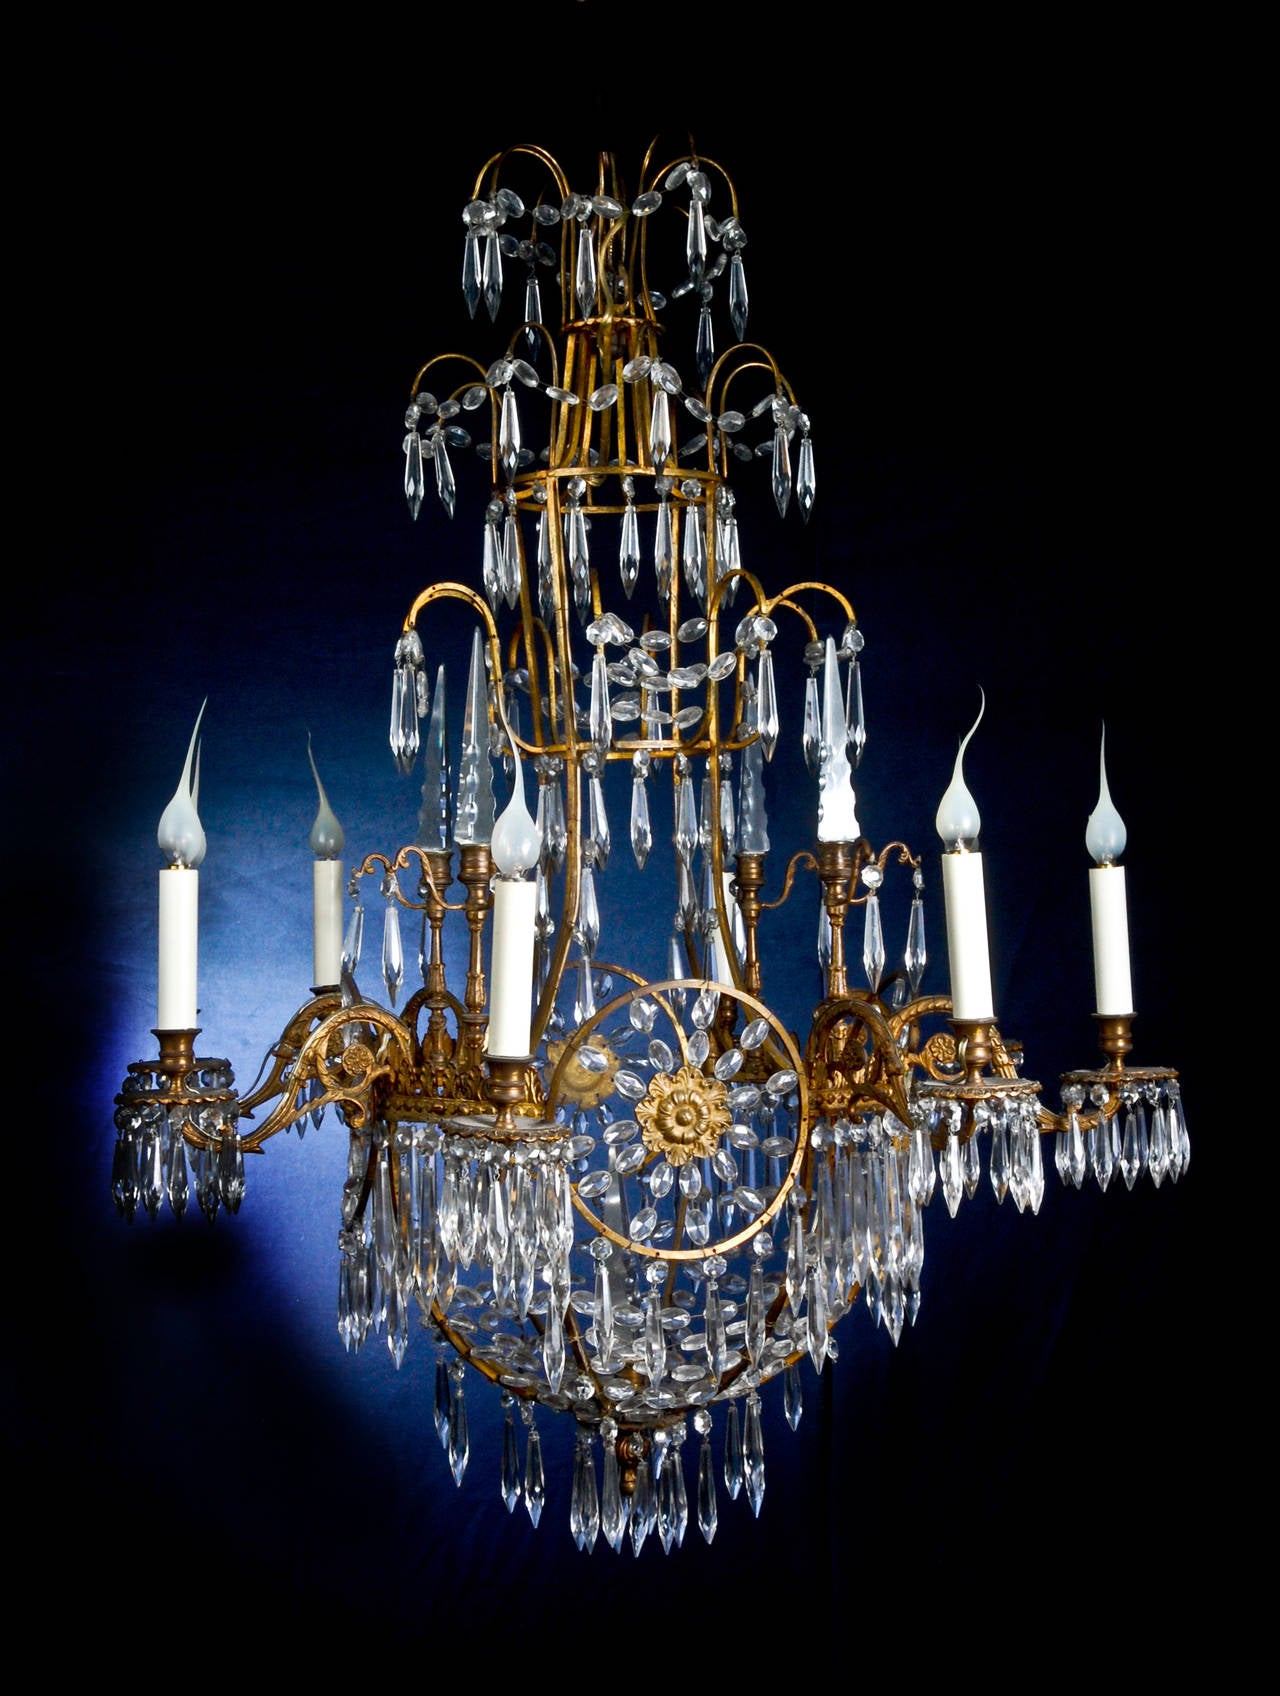 A Fine Antique Russian Neoclassical Gilt Bronze & Cut Crystal Multi light chandelier embellished with cut crystal chains and prisms.